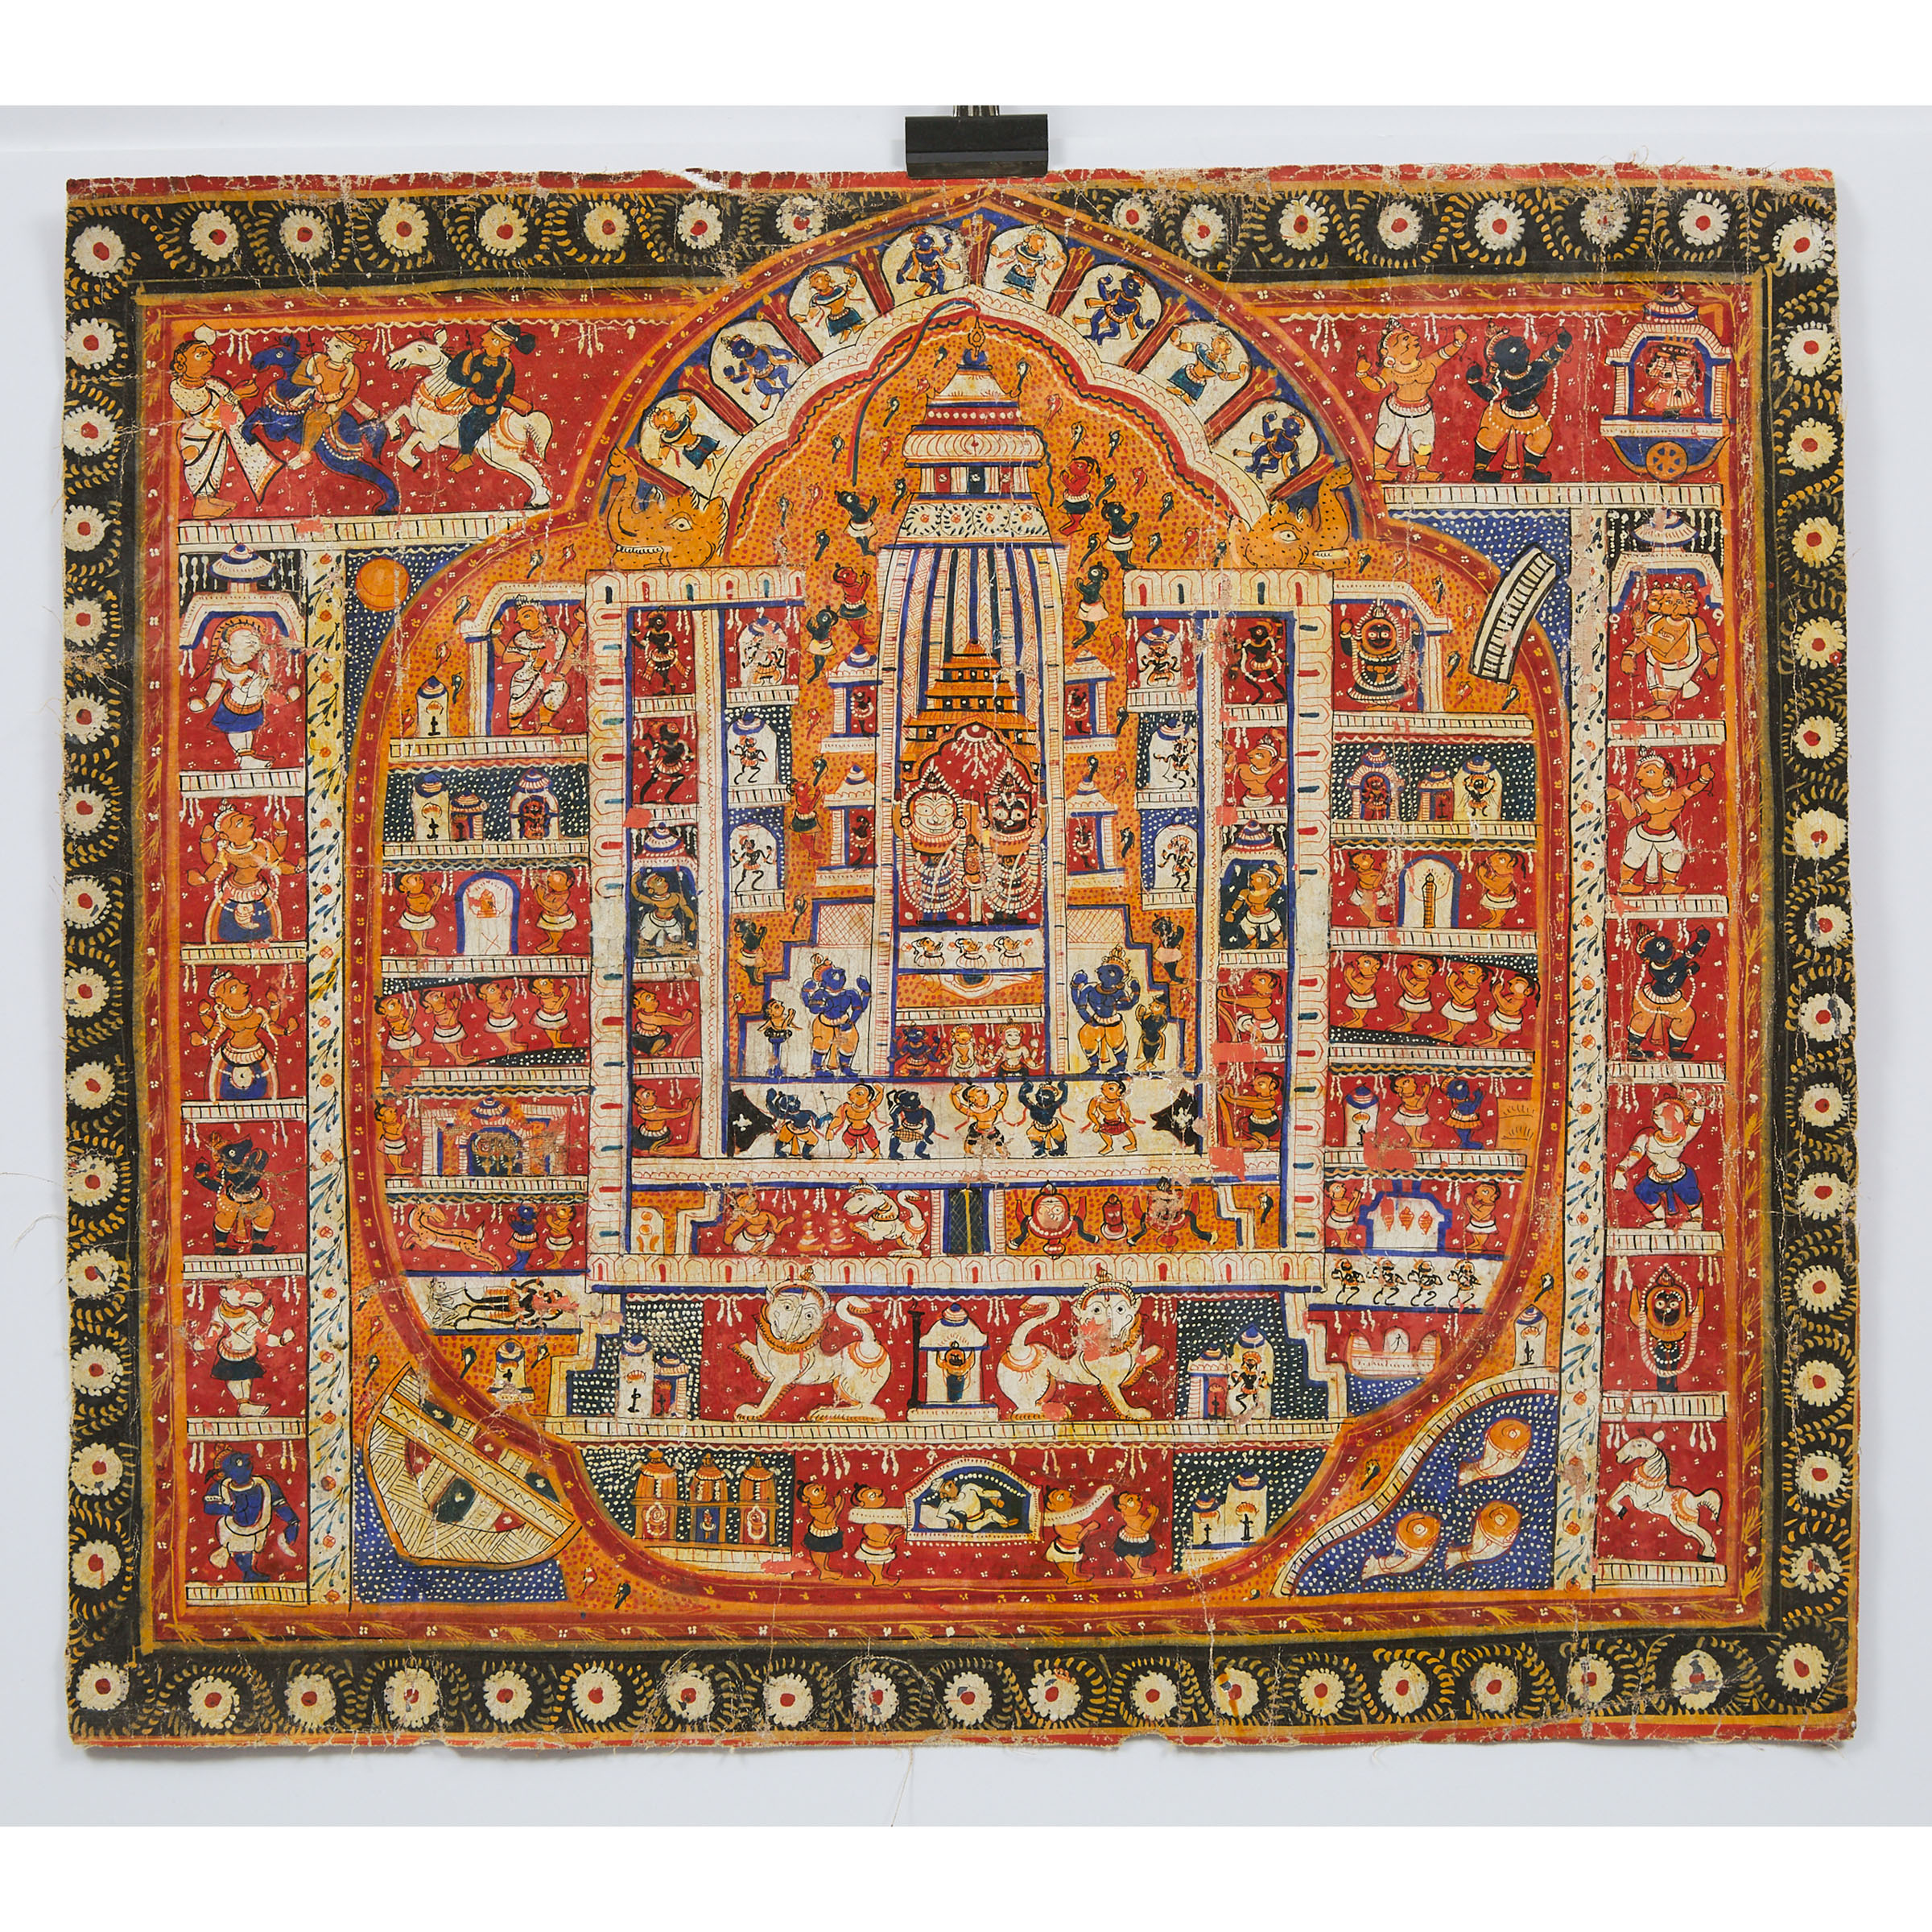 An Indian Silk Painting Depicting Deities Enshrined in the Jagannath Temple, 19th Century